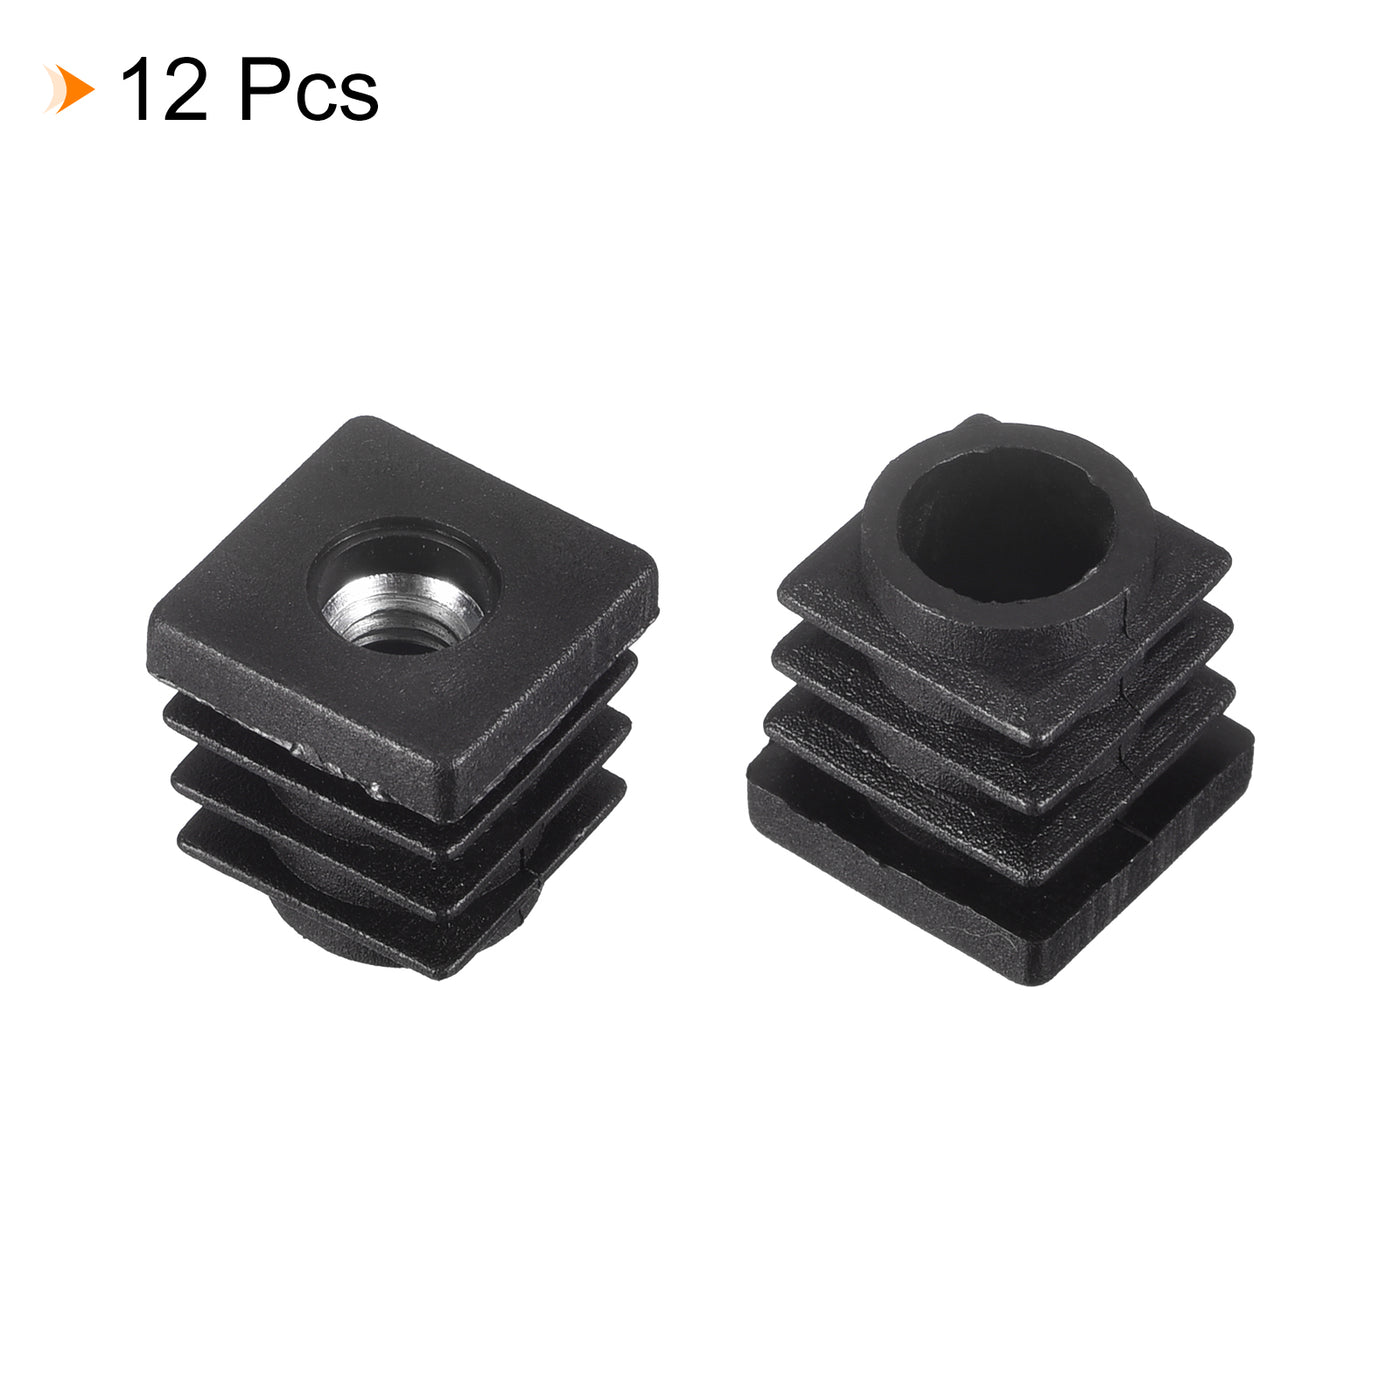 uxcell Uxcell 12Pcs 0.59"x0.59" Caster Insert with Thread, Square M6 Thread for Furniture